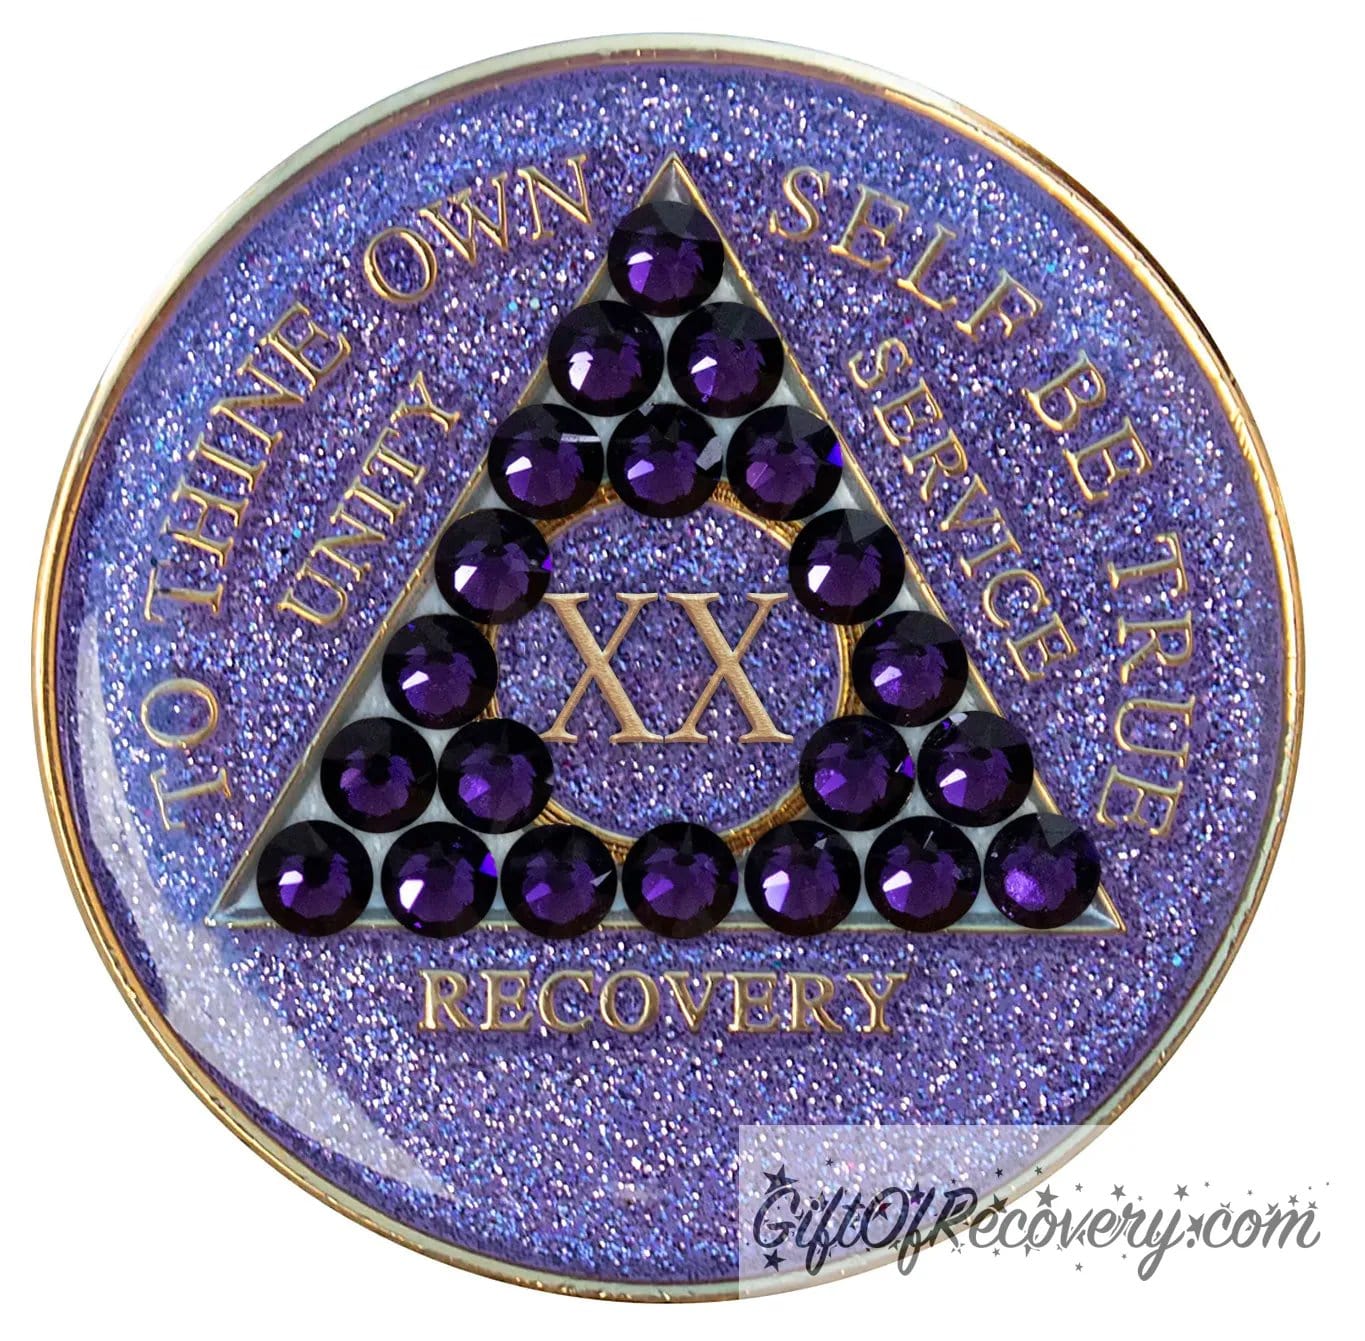 20 year glitter purple AA medallion with 21 purple velvet genuine crystals, that create the triangle in middle, and to thine own self be true, unity, service, recovery, the roman numeral in the center of the circle triangle, along with the rim of the recovery medallion, are embossed in 14 gold plated brass, sealed in resin for glossy finish.